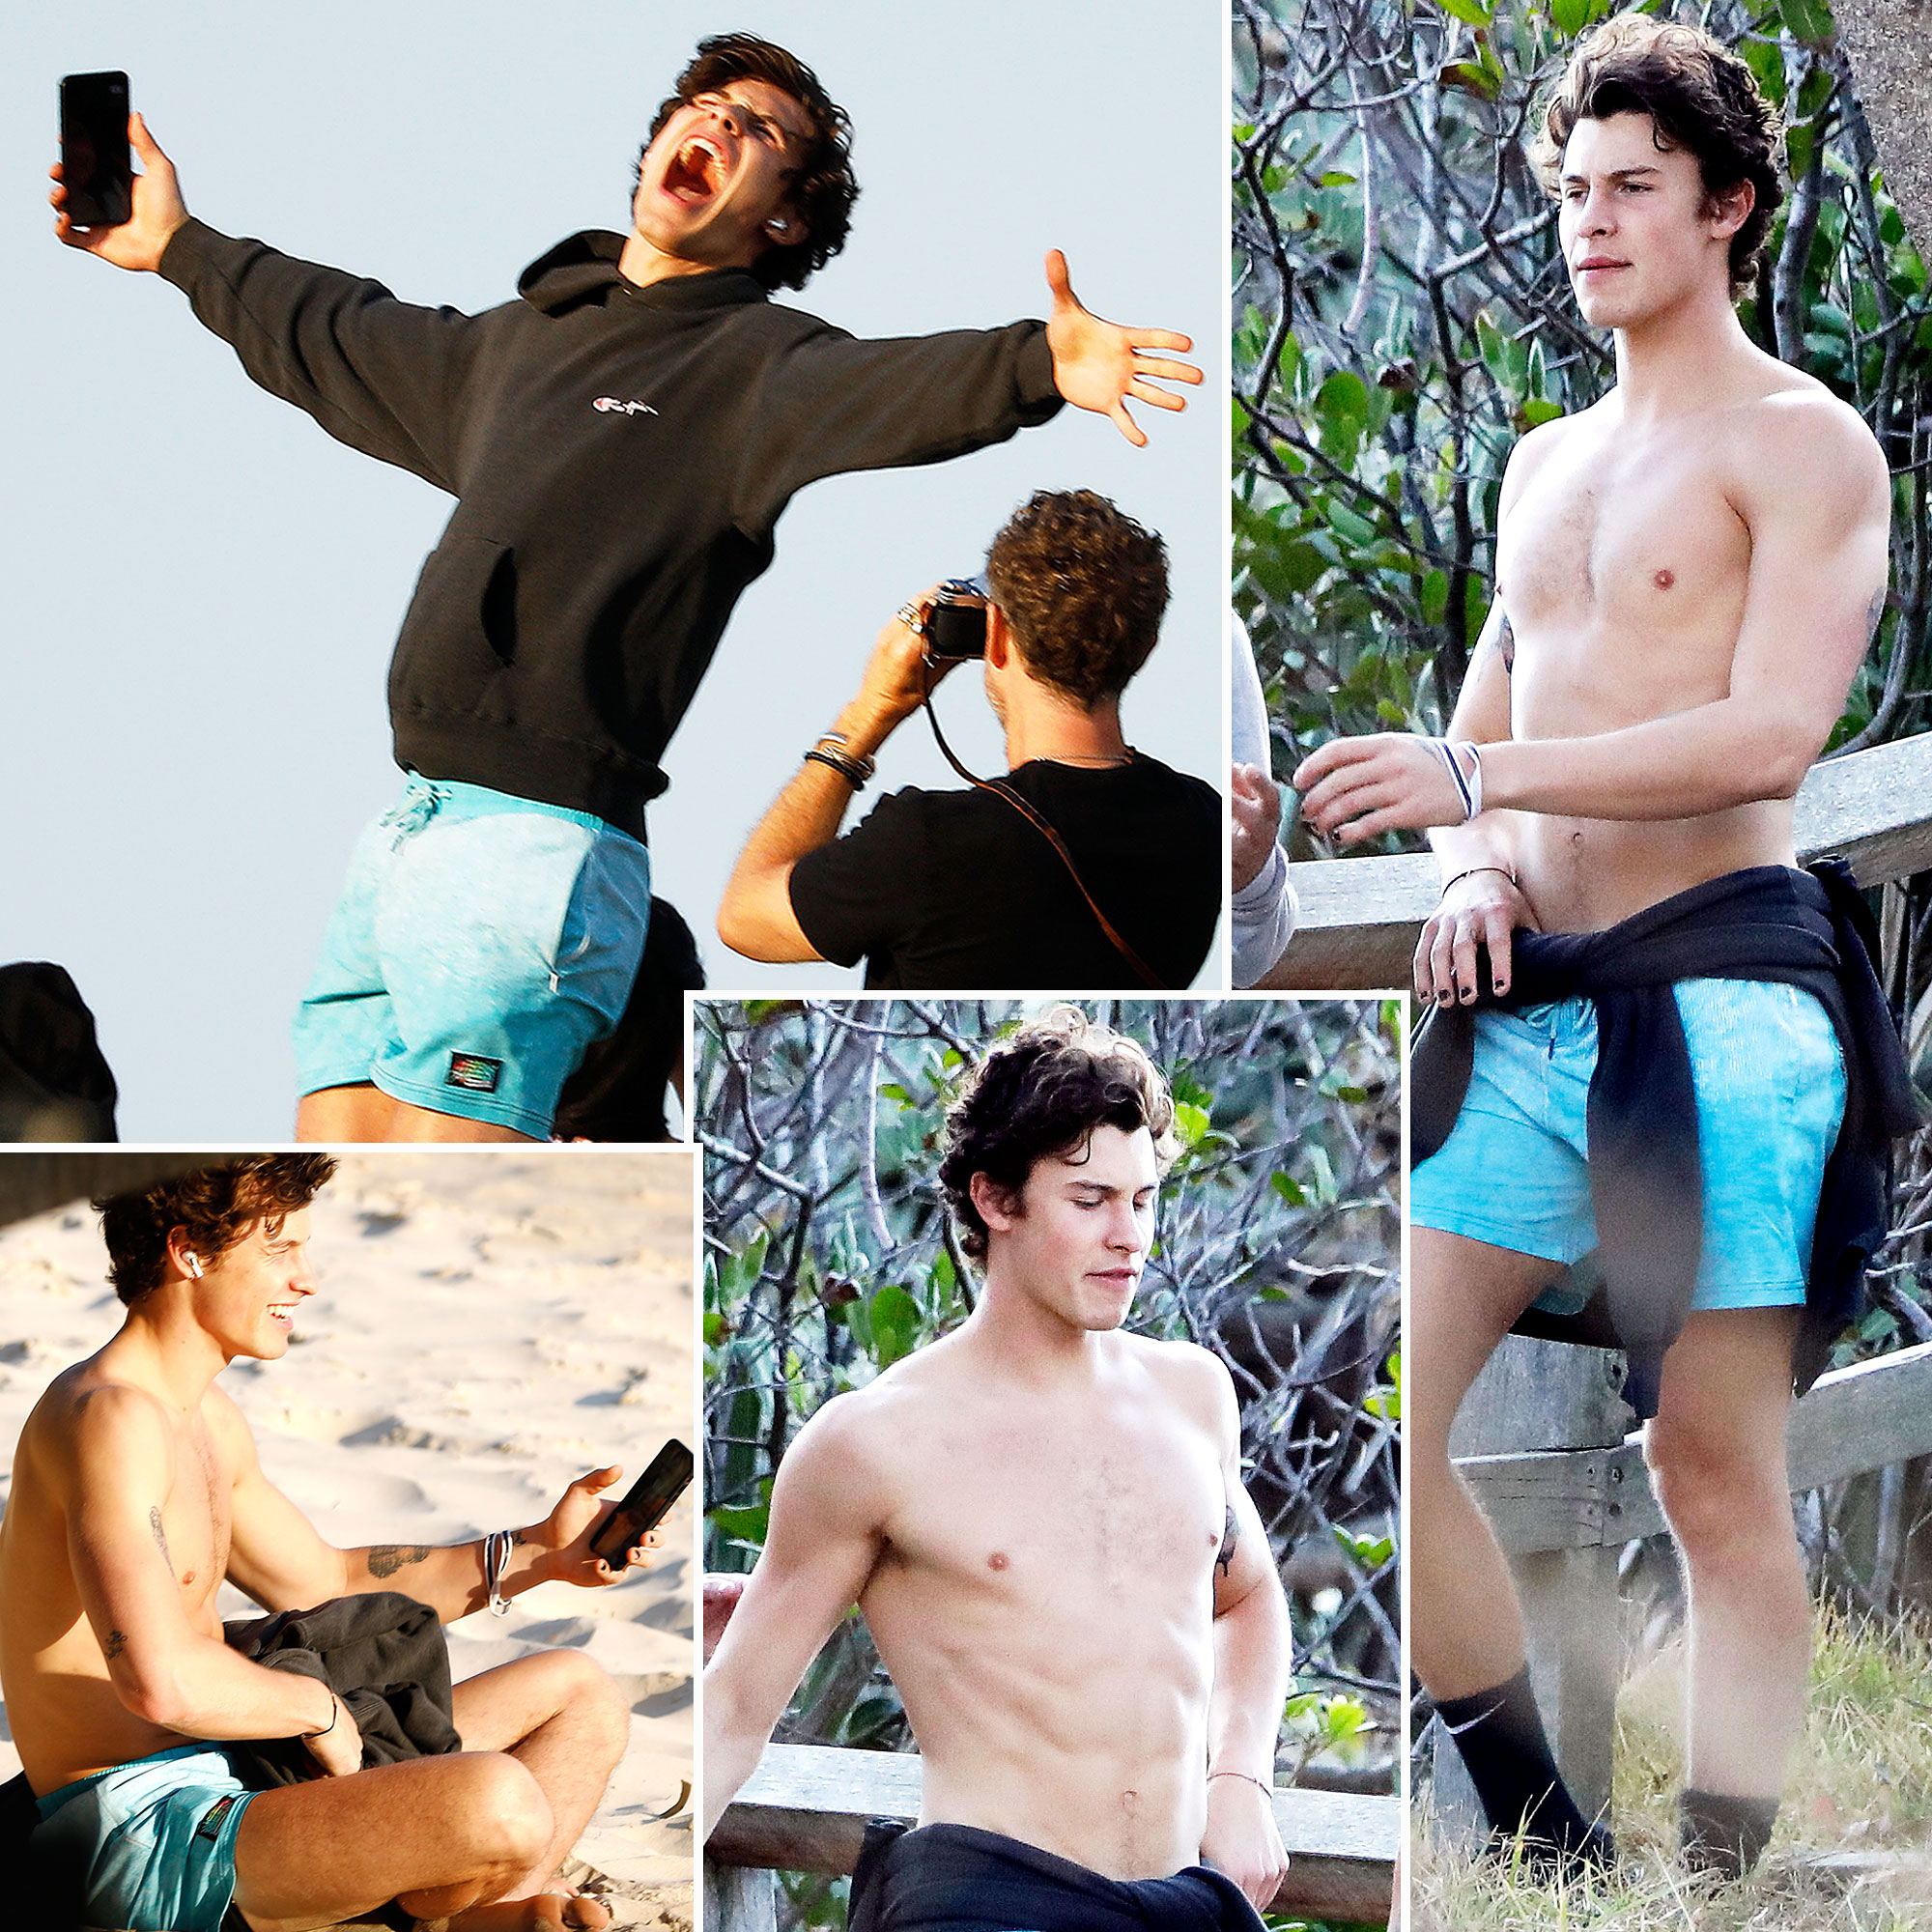 Shawn Mendes Goes Shirtless on Australia Beach With Friends.